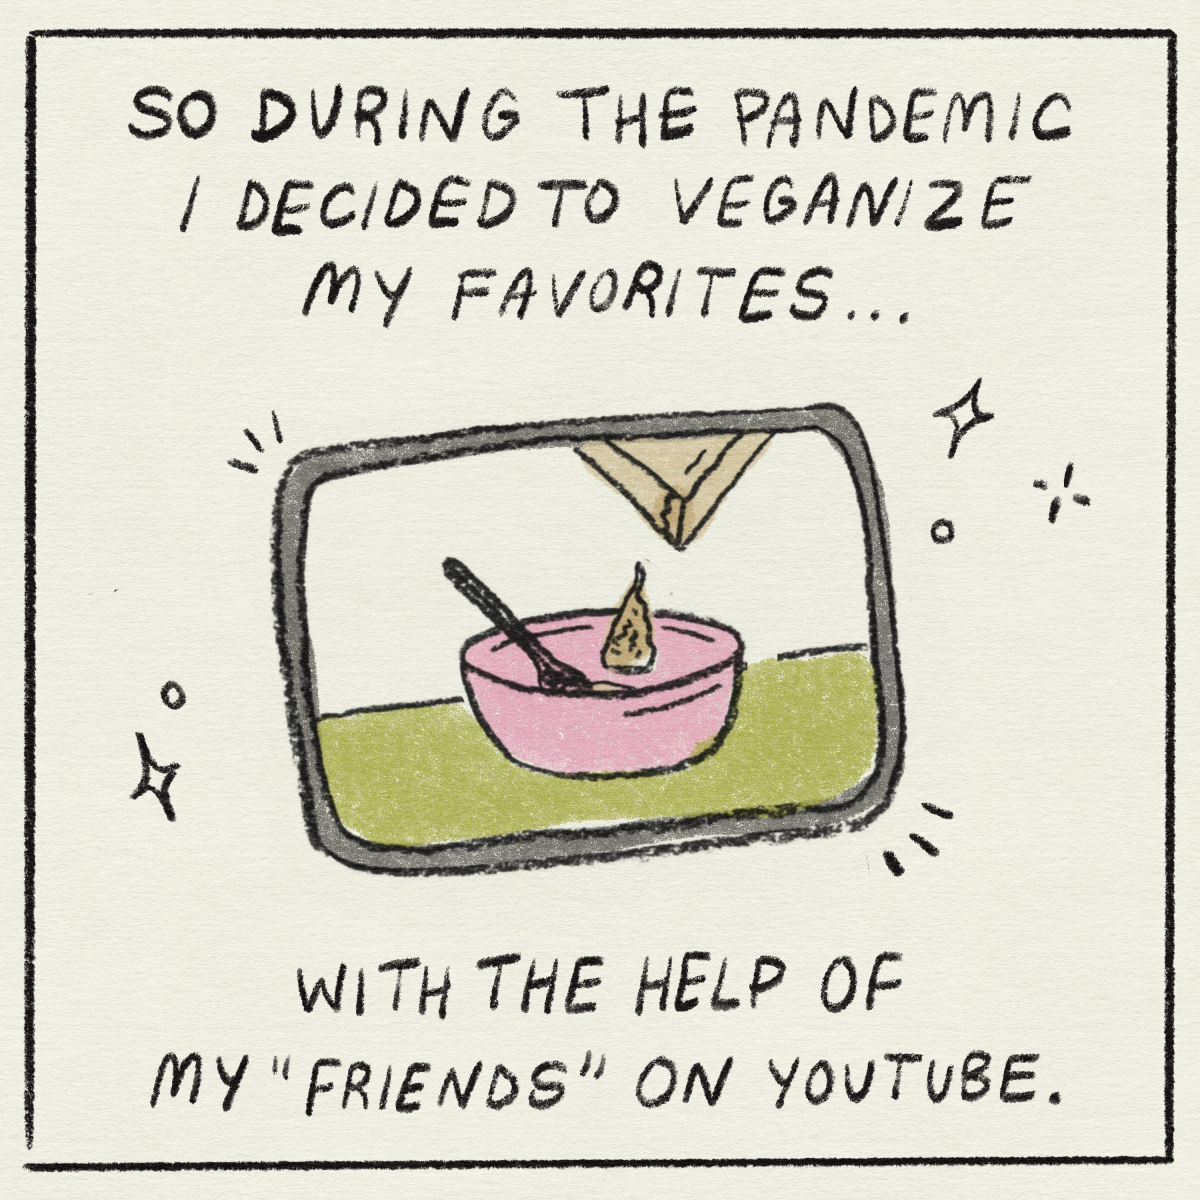 "so during the pandemic I decided to veganize my favorites... with the help of my "friends" on youtube."